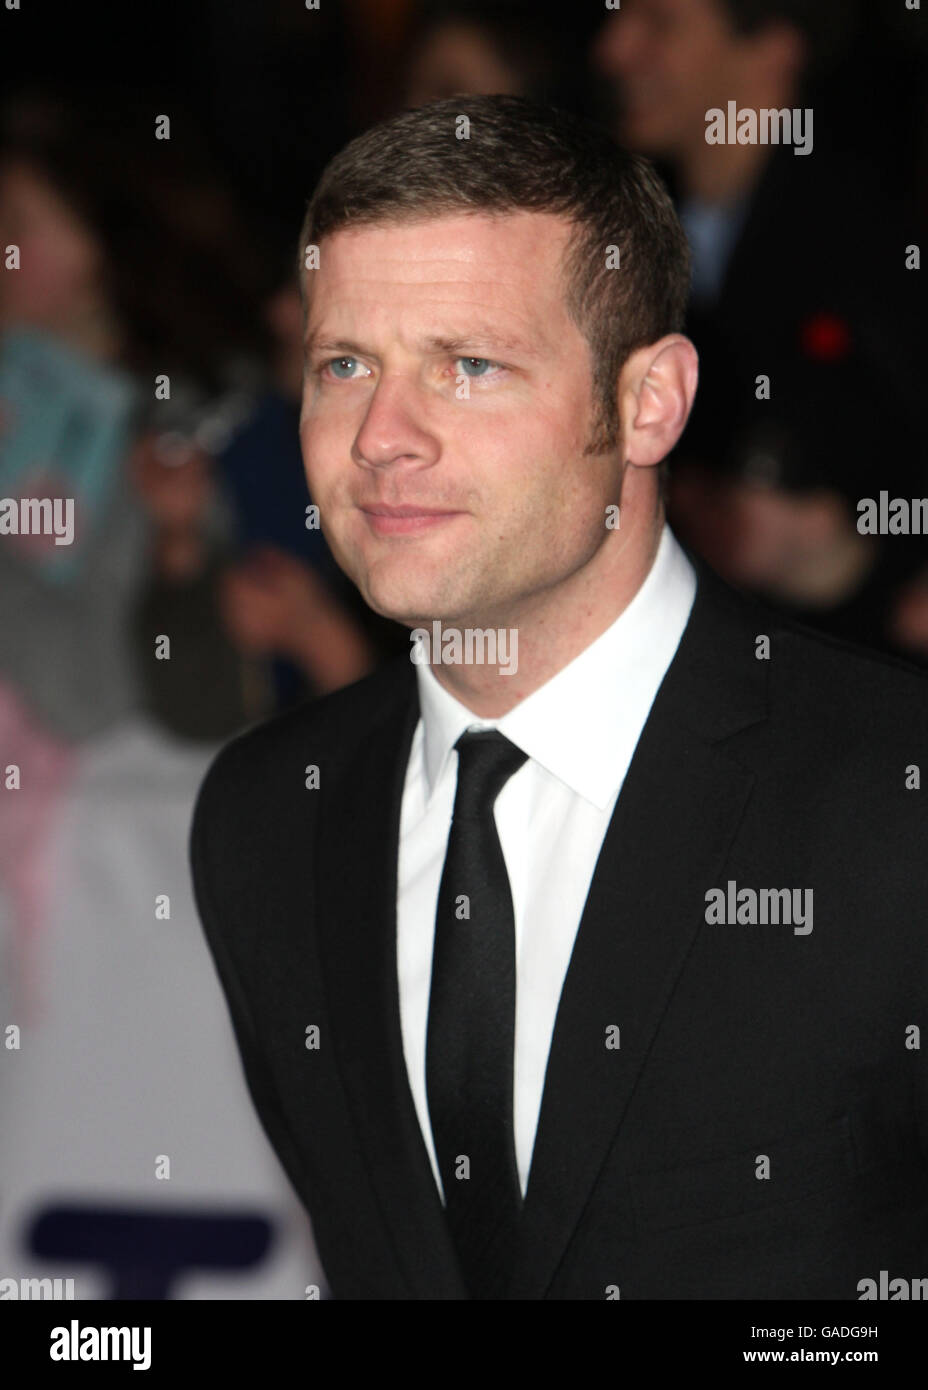 Dermot O'Leary arriving for the 2007 National Television Awards (NTA's) at the Royal Albert Hall, west London. Stock Photo